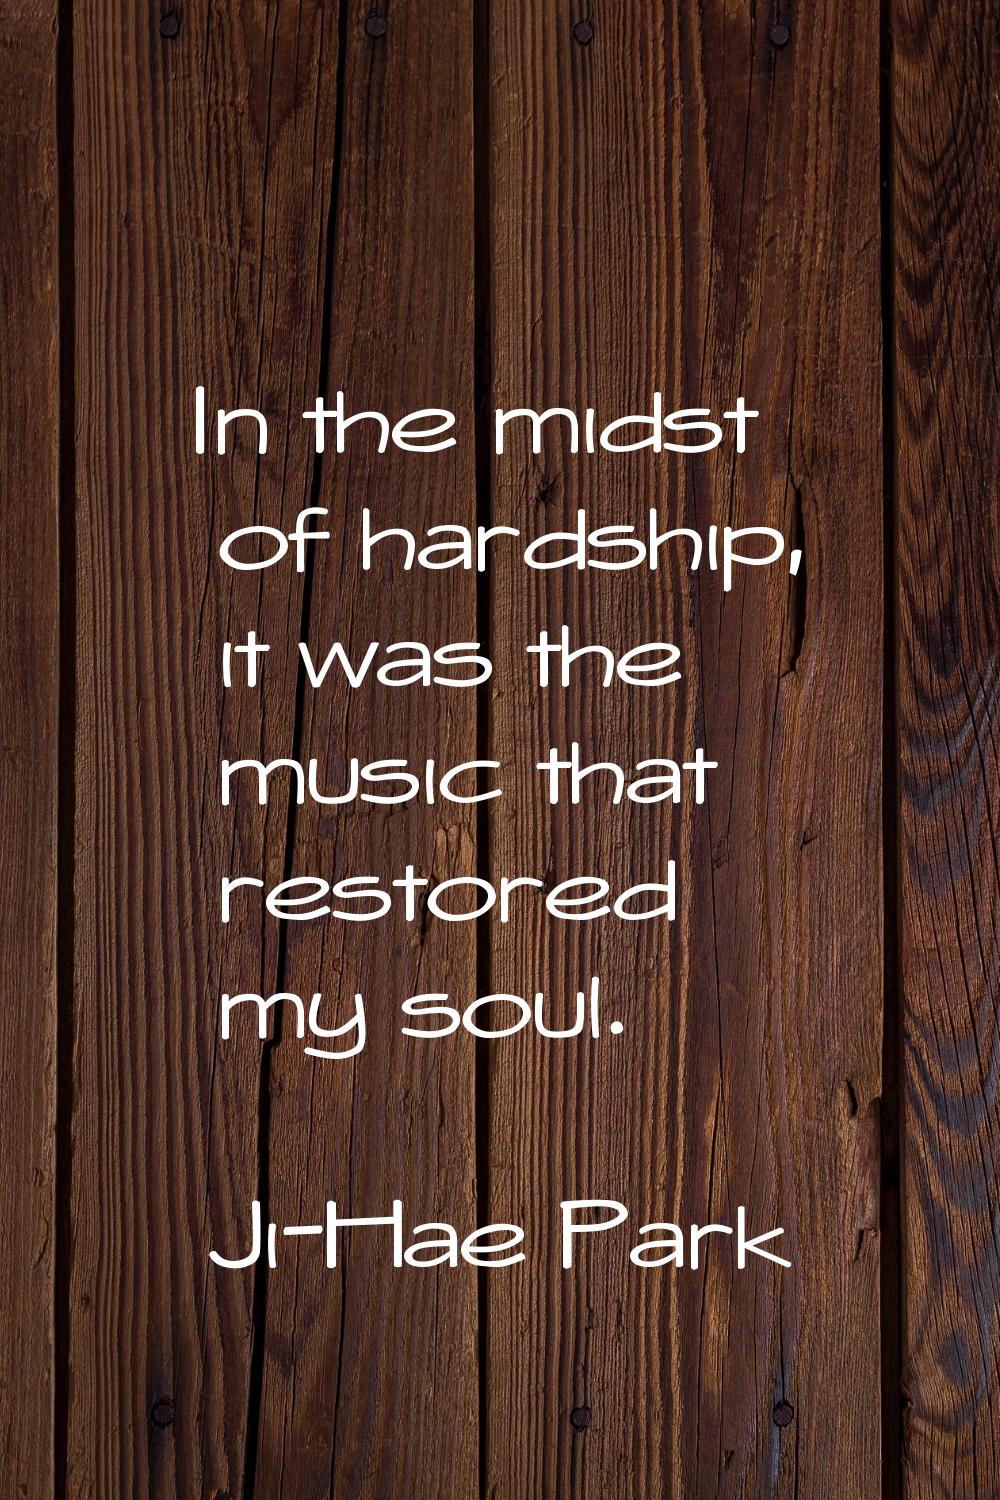 In the midst of hardship, it was the music that restored my soul.